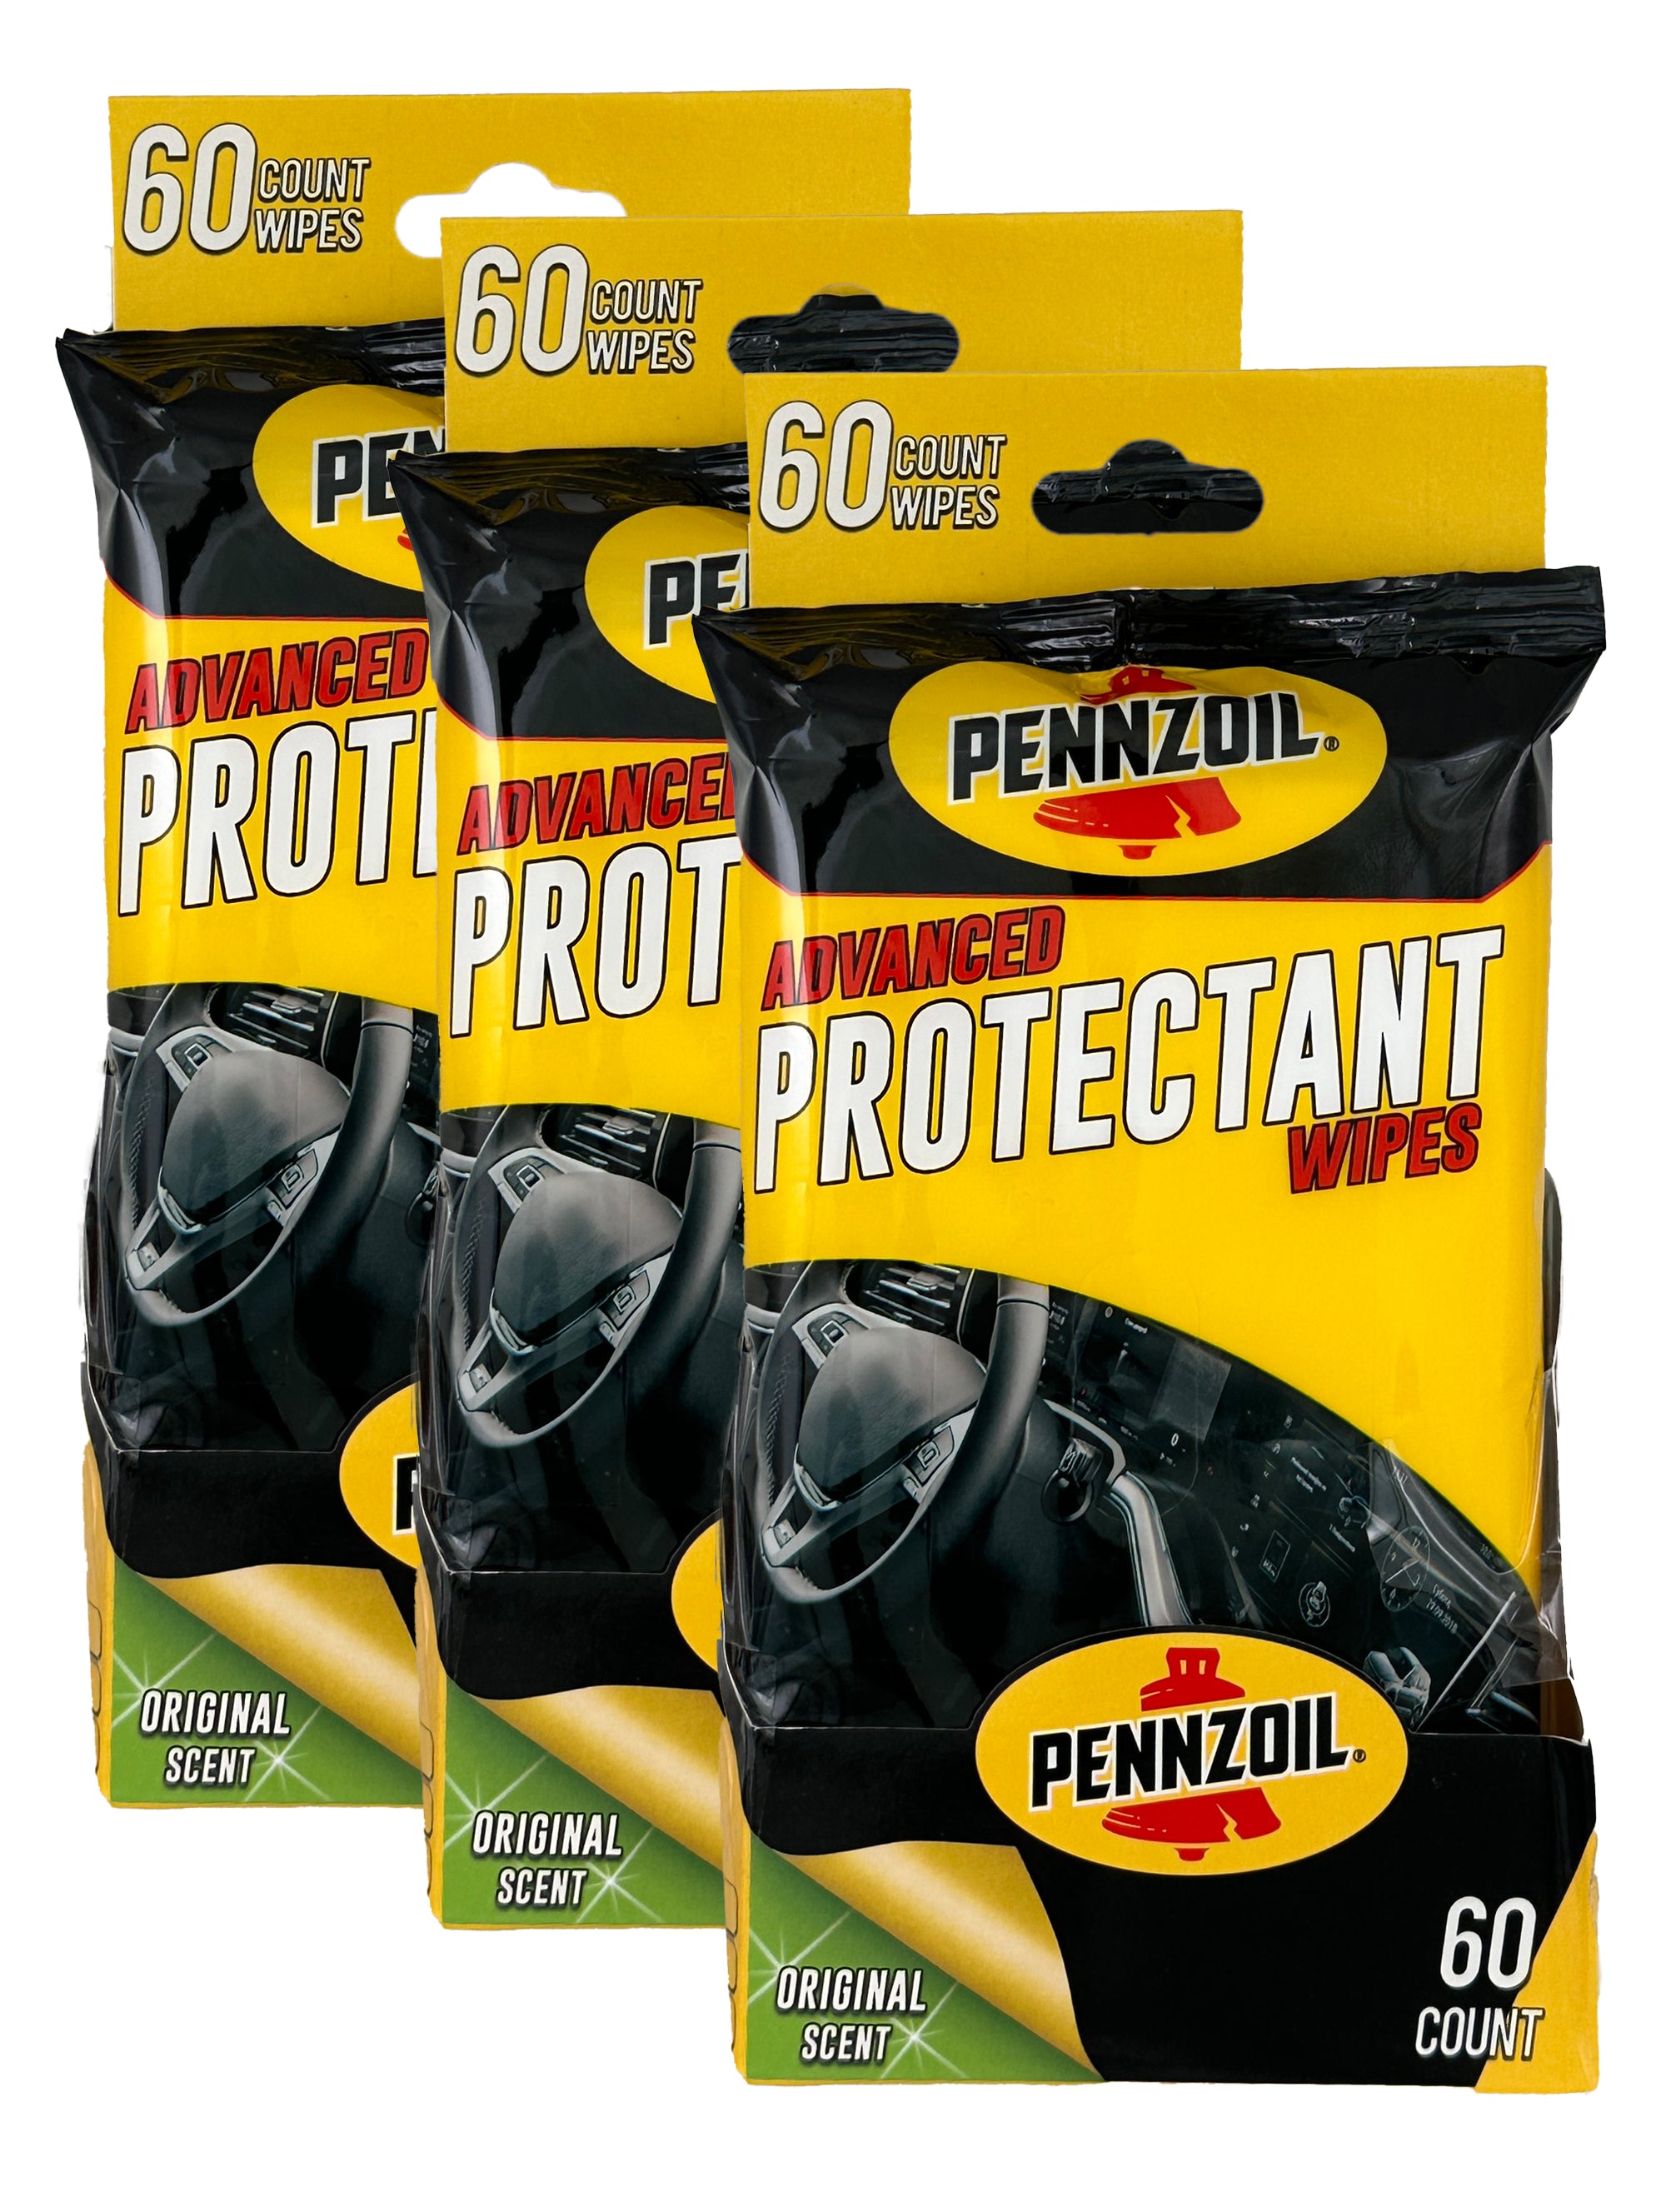 Pennzoil Protectant Wipes - Car Cleaner, Interior Car Wipes for Advanced  Car Cleaning, Protectant Wipes, Pouch, 30-Count, 6 Packs by GOSO Direct